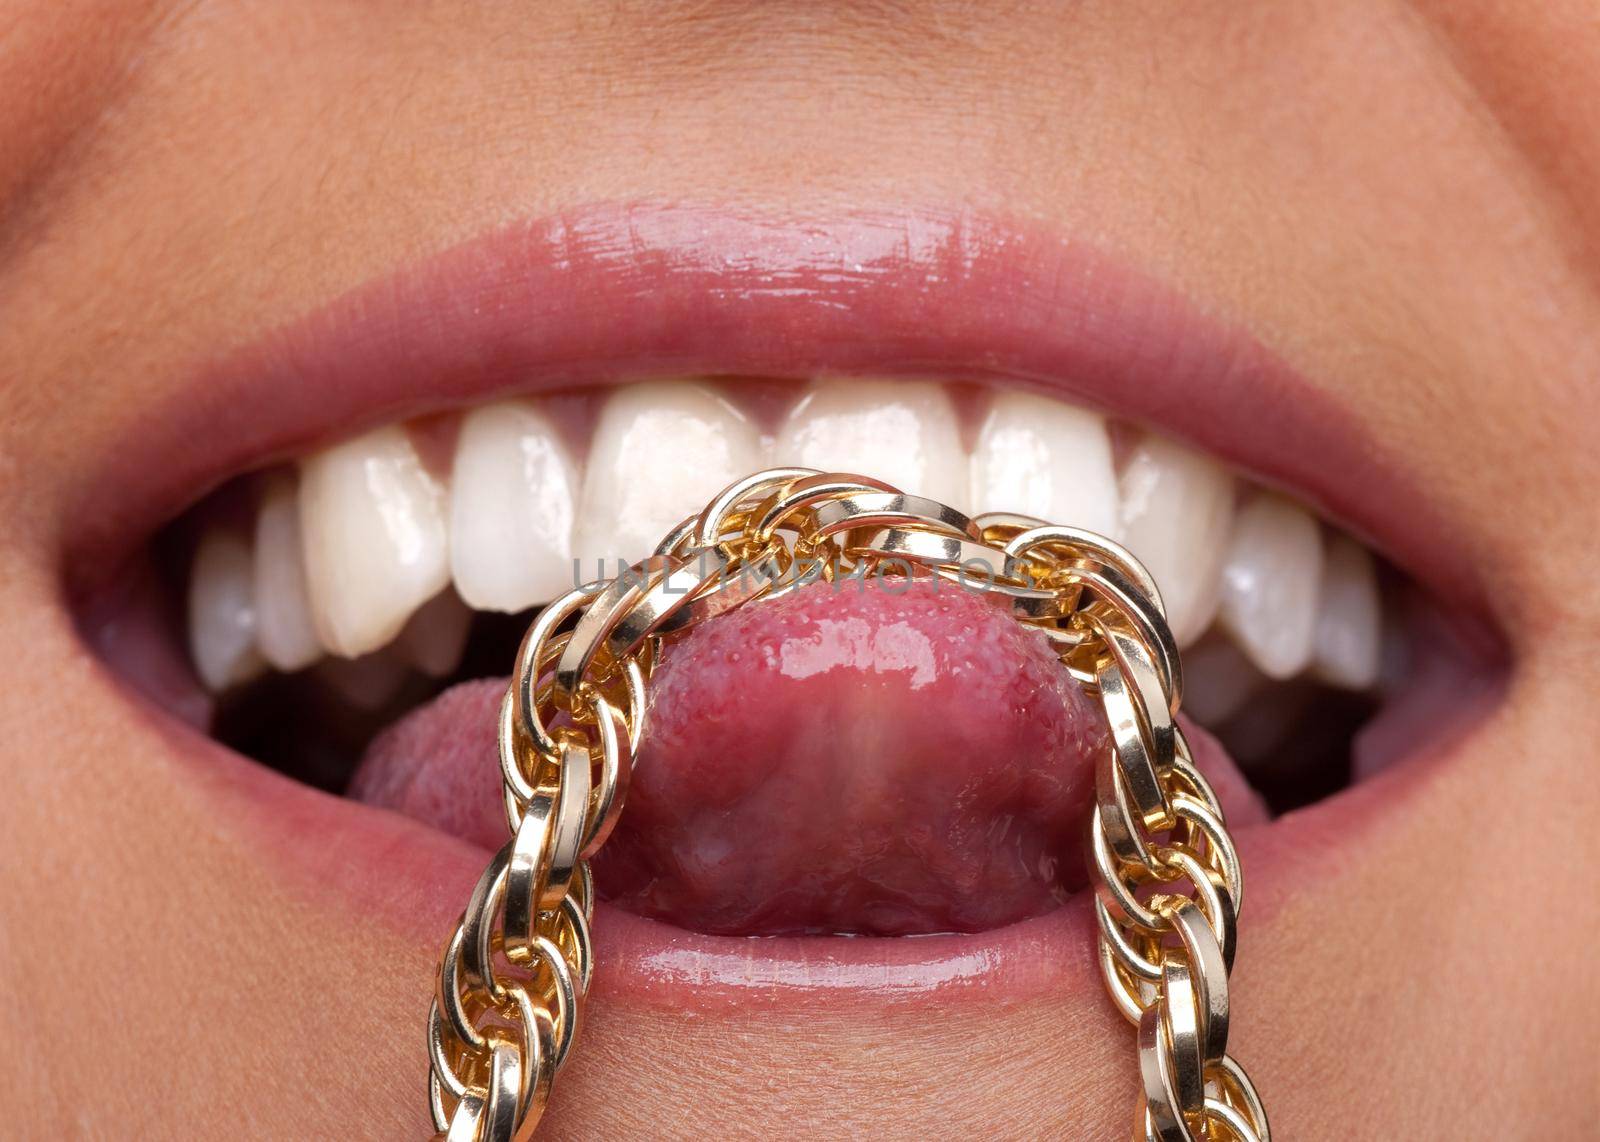 Beauty sexy woman lips smile and gold chain on tongue close-up shot